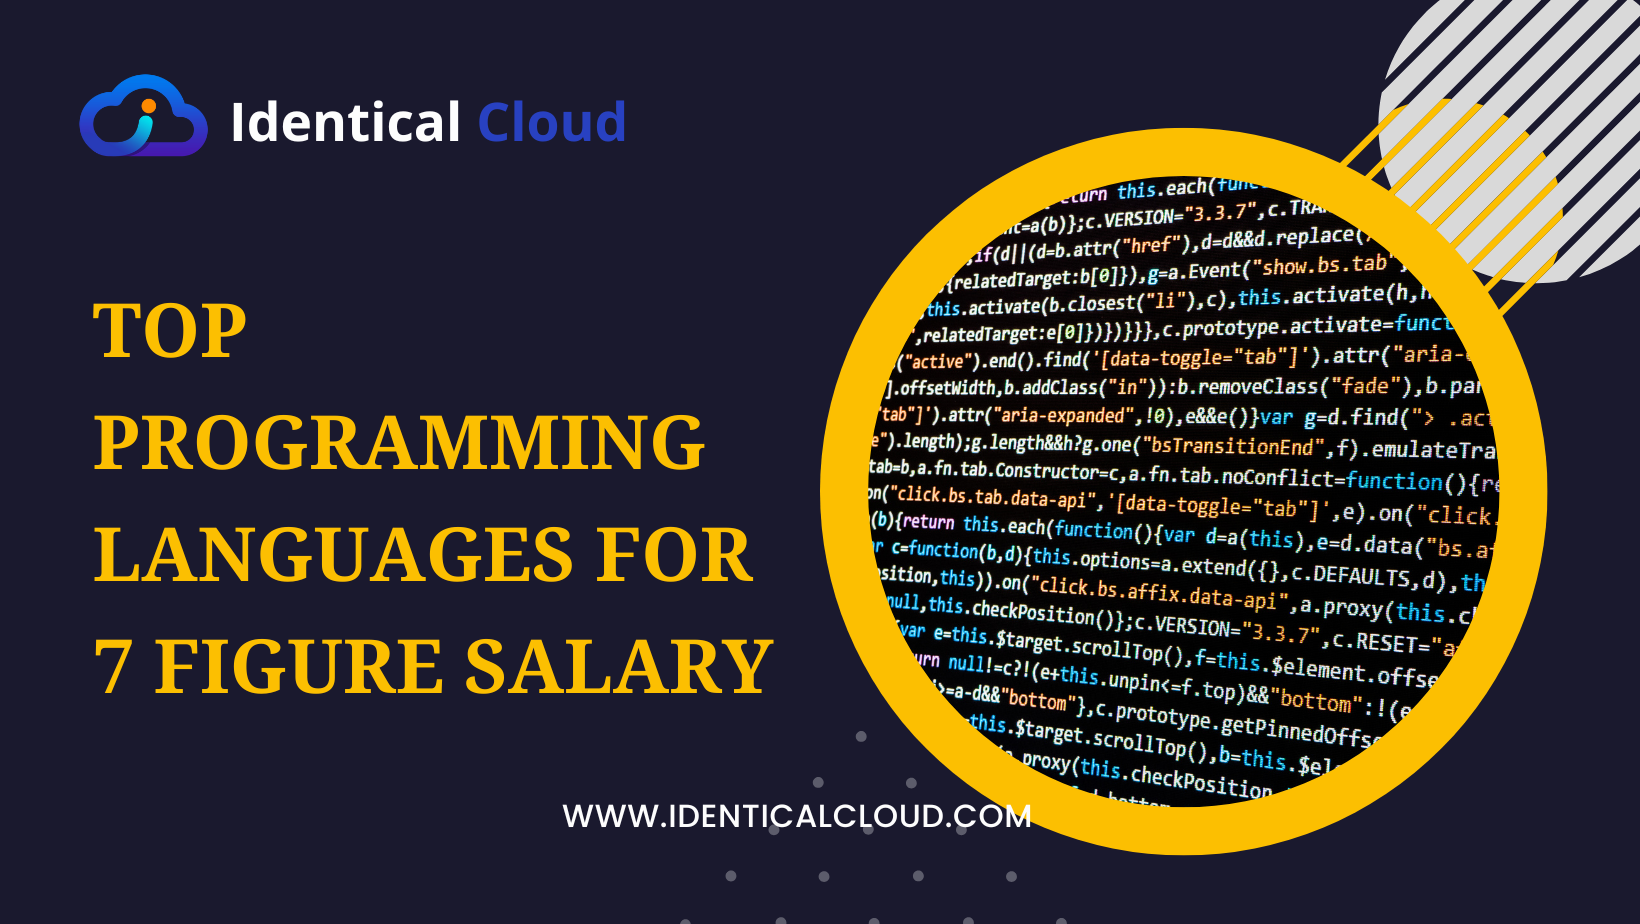 Top Programming Languages For 7 Figure Salary - identicalcloud.com